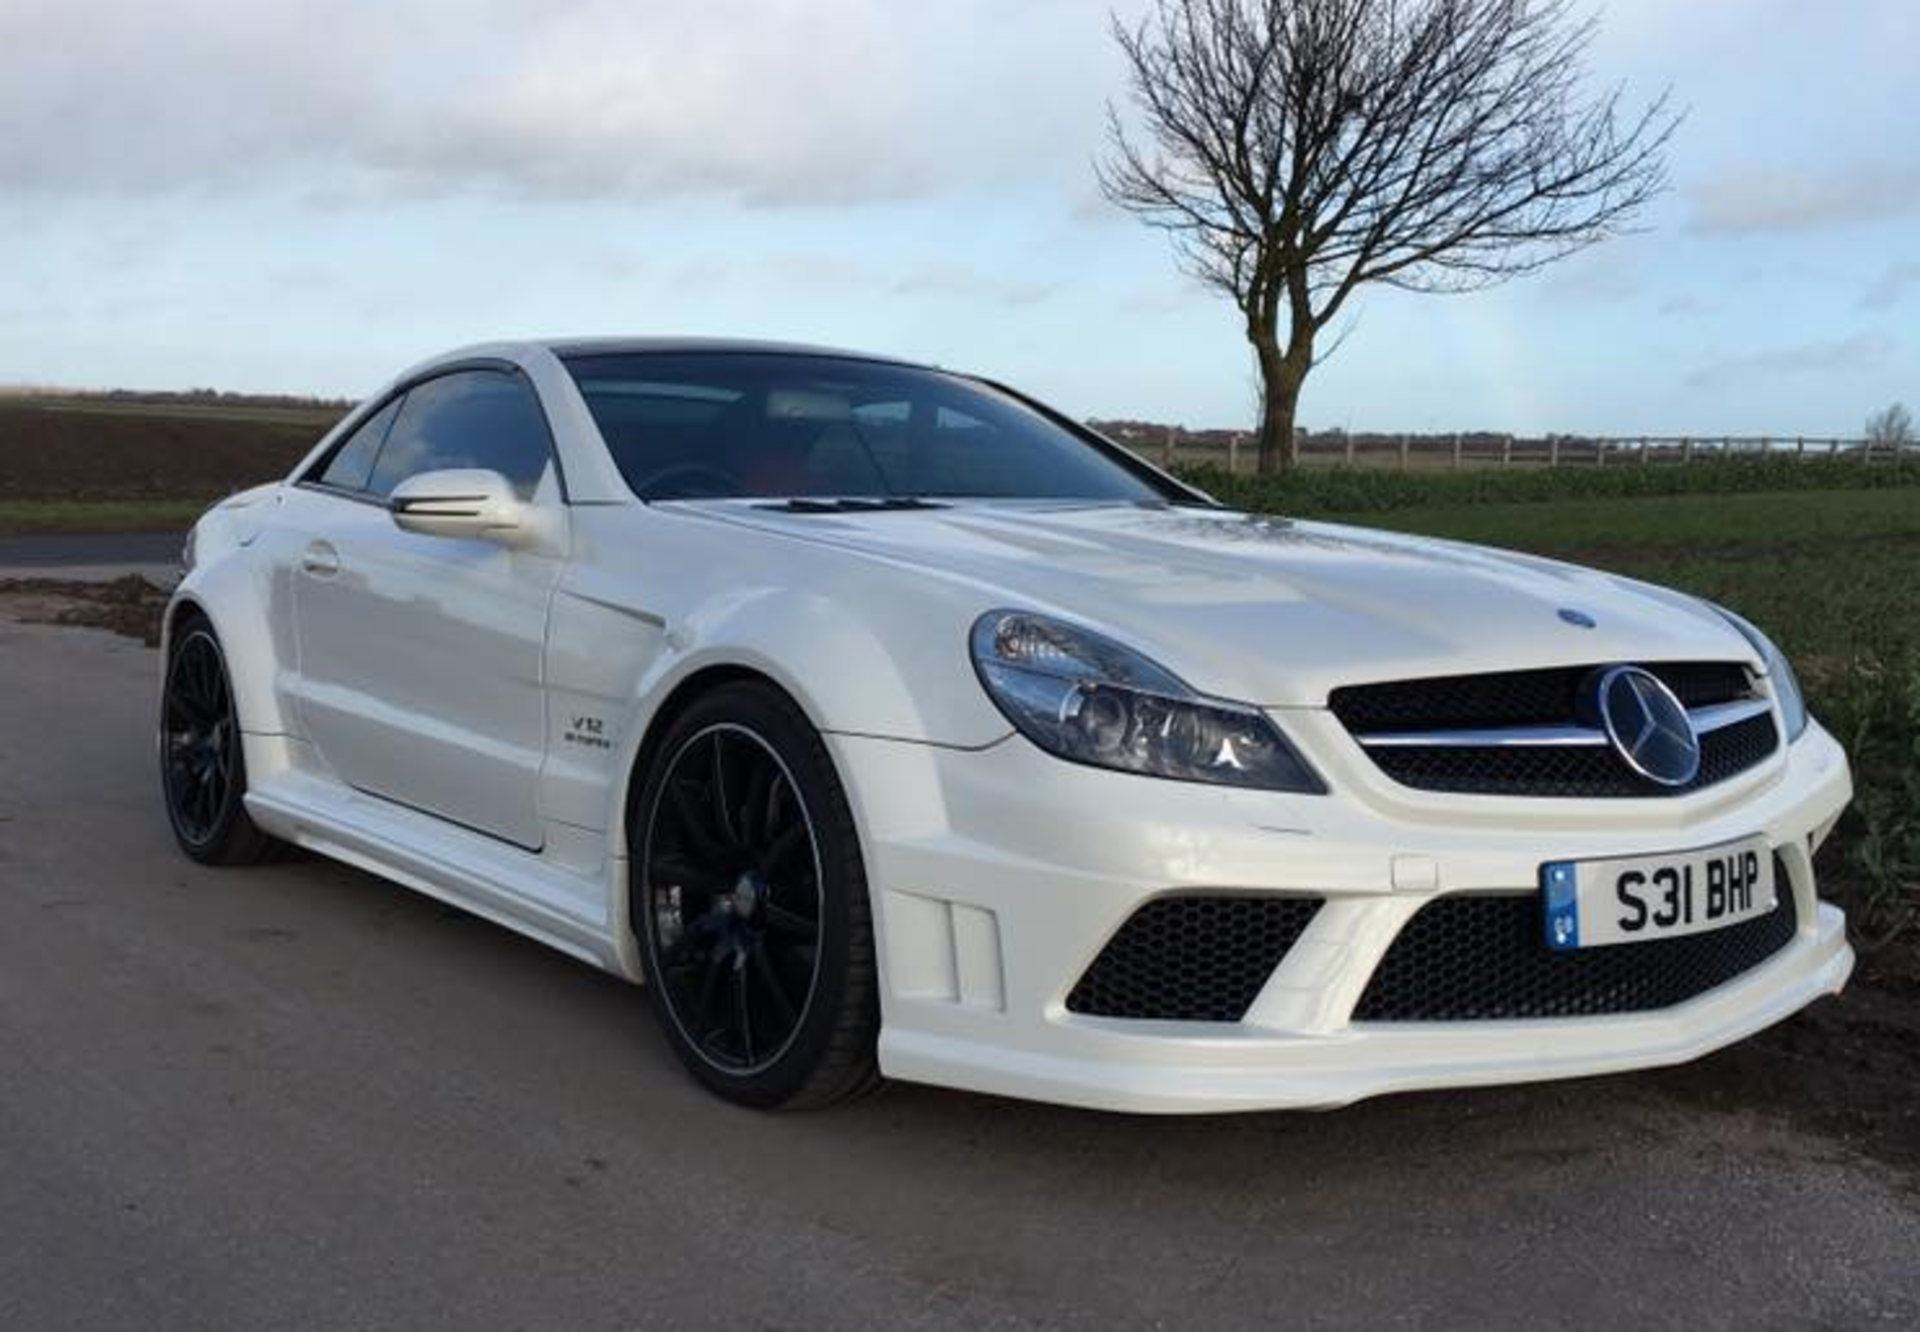 2002 Mercedes SL55 AMG - Private Registration 'S31 BHP' Included ***Reserve Lowered*** - Image 3 of 9